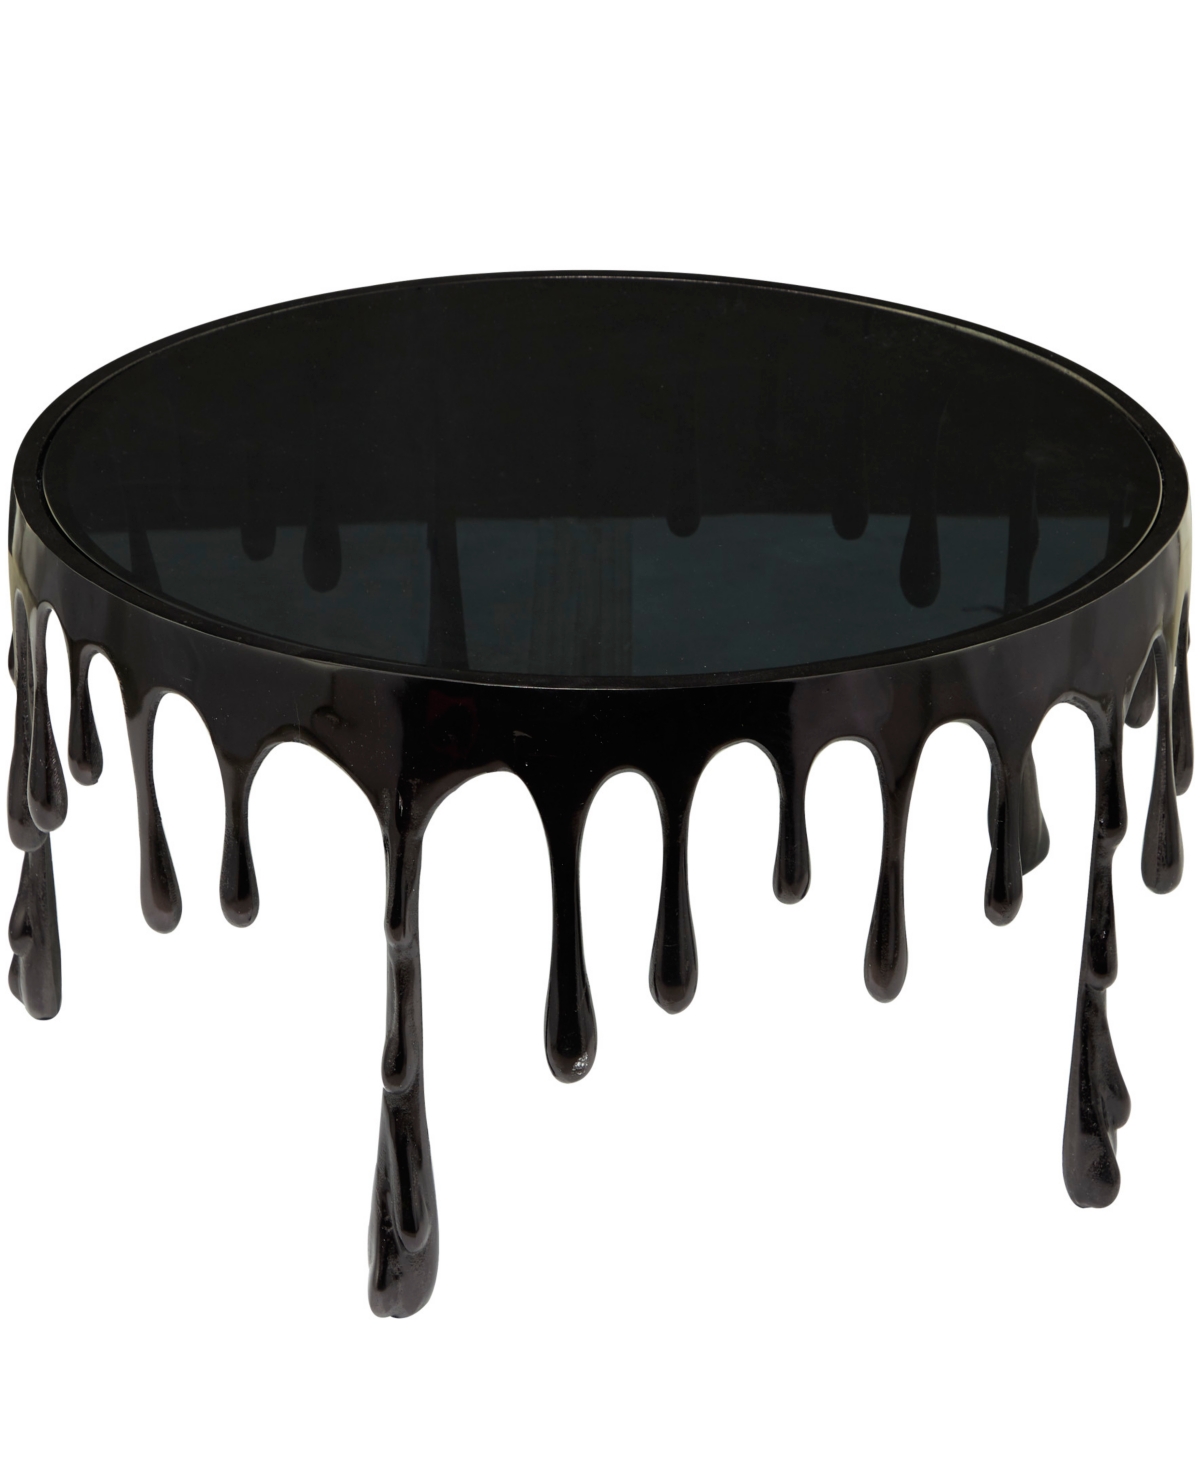 Rosemary Lane Aluminum Drip Coffee Table With Melting Designed Legs And Shaded Glass Top, 36" X 36" X 16" In Black